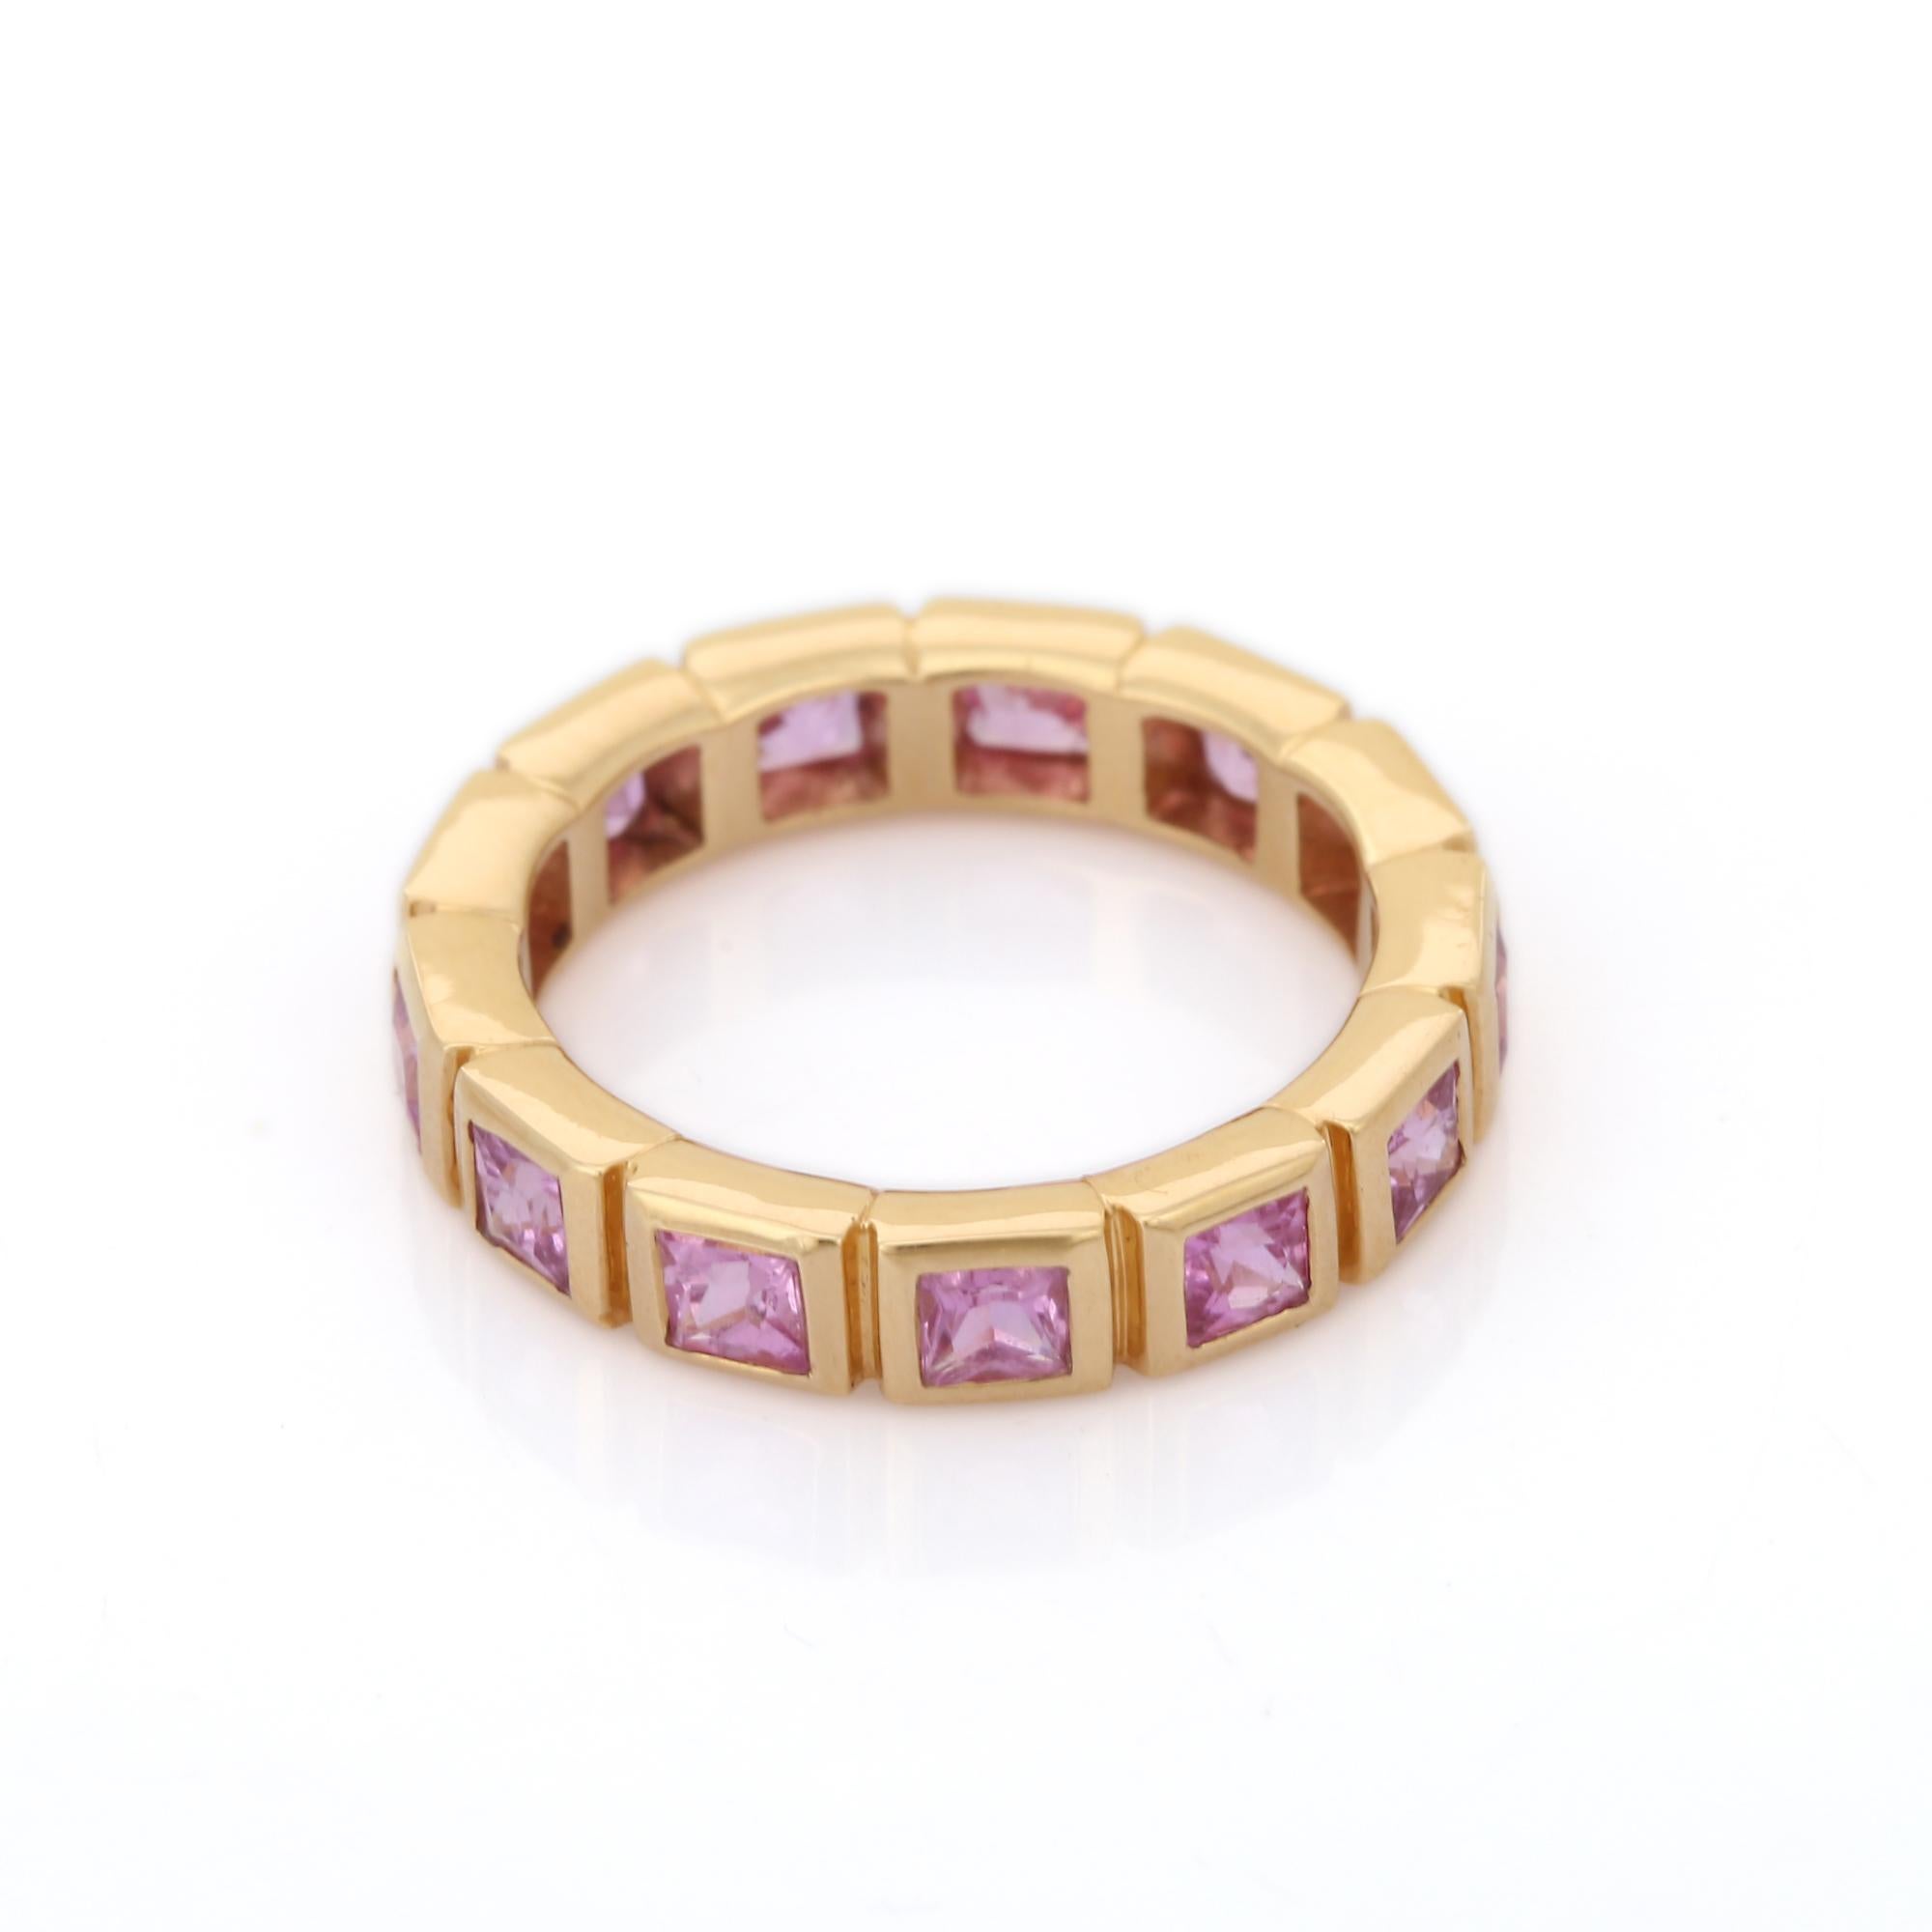 For Sale:  2.48 Carat Pink Sapphire Square Cut Eternity Band Ring in 18K Yellow Gold 7